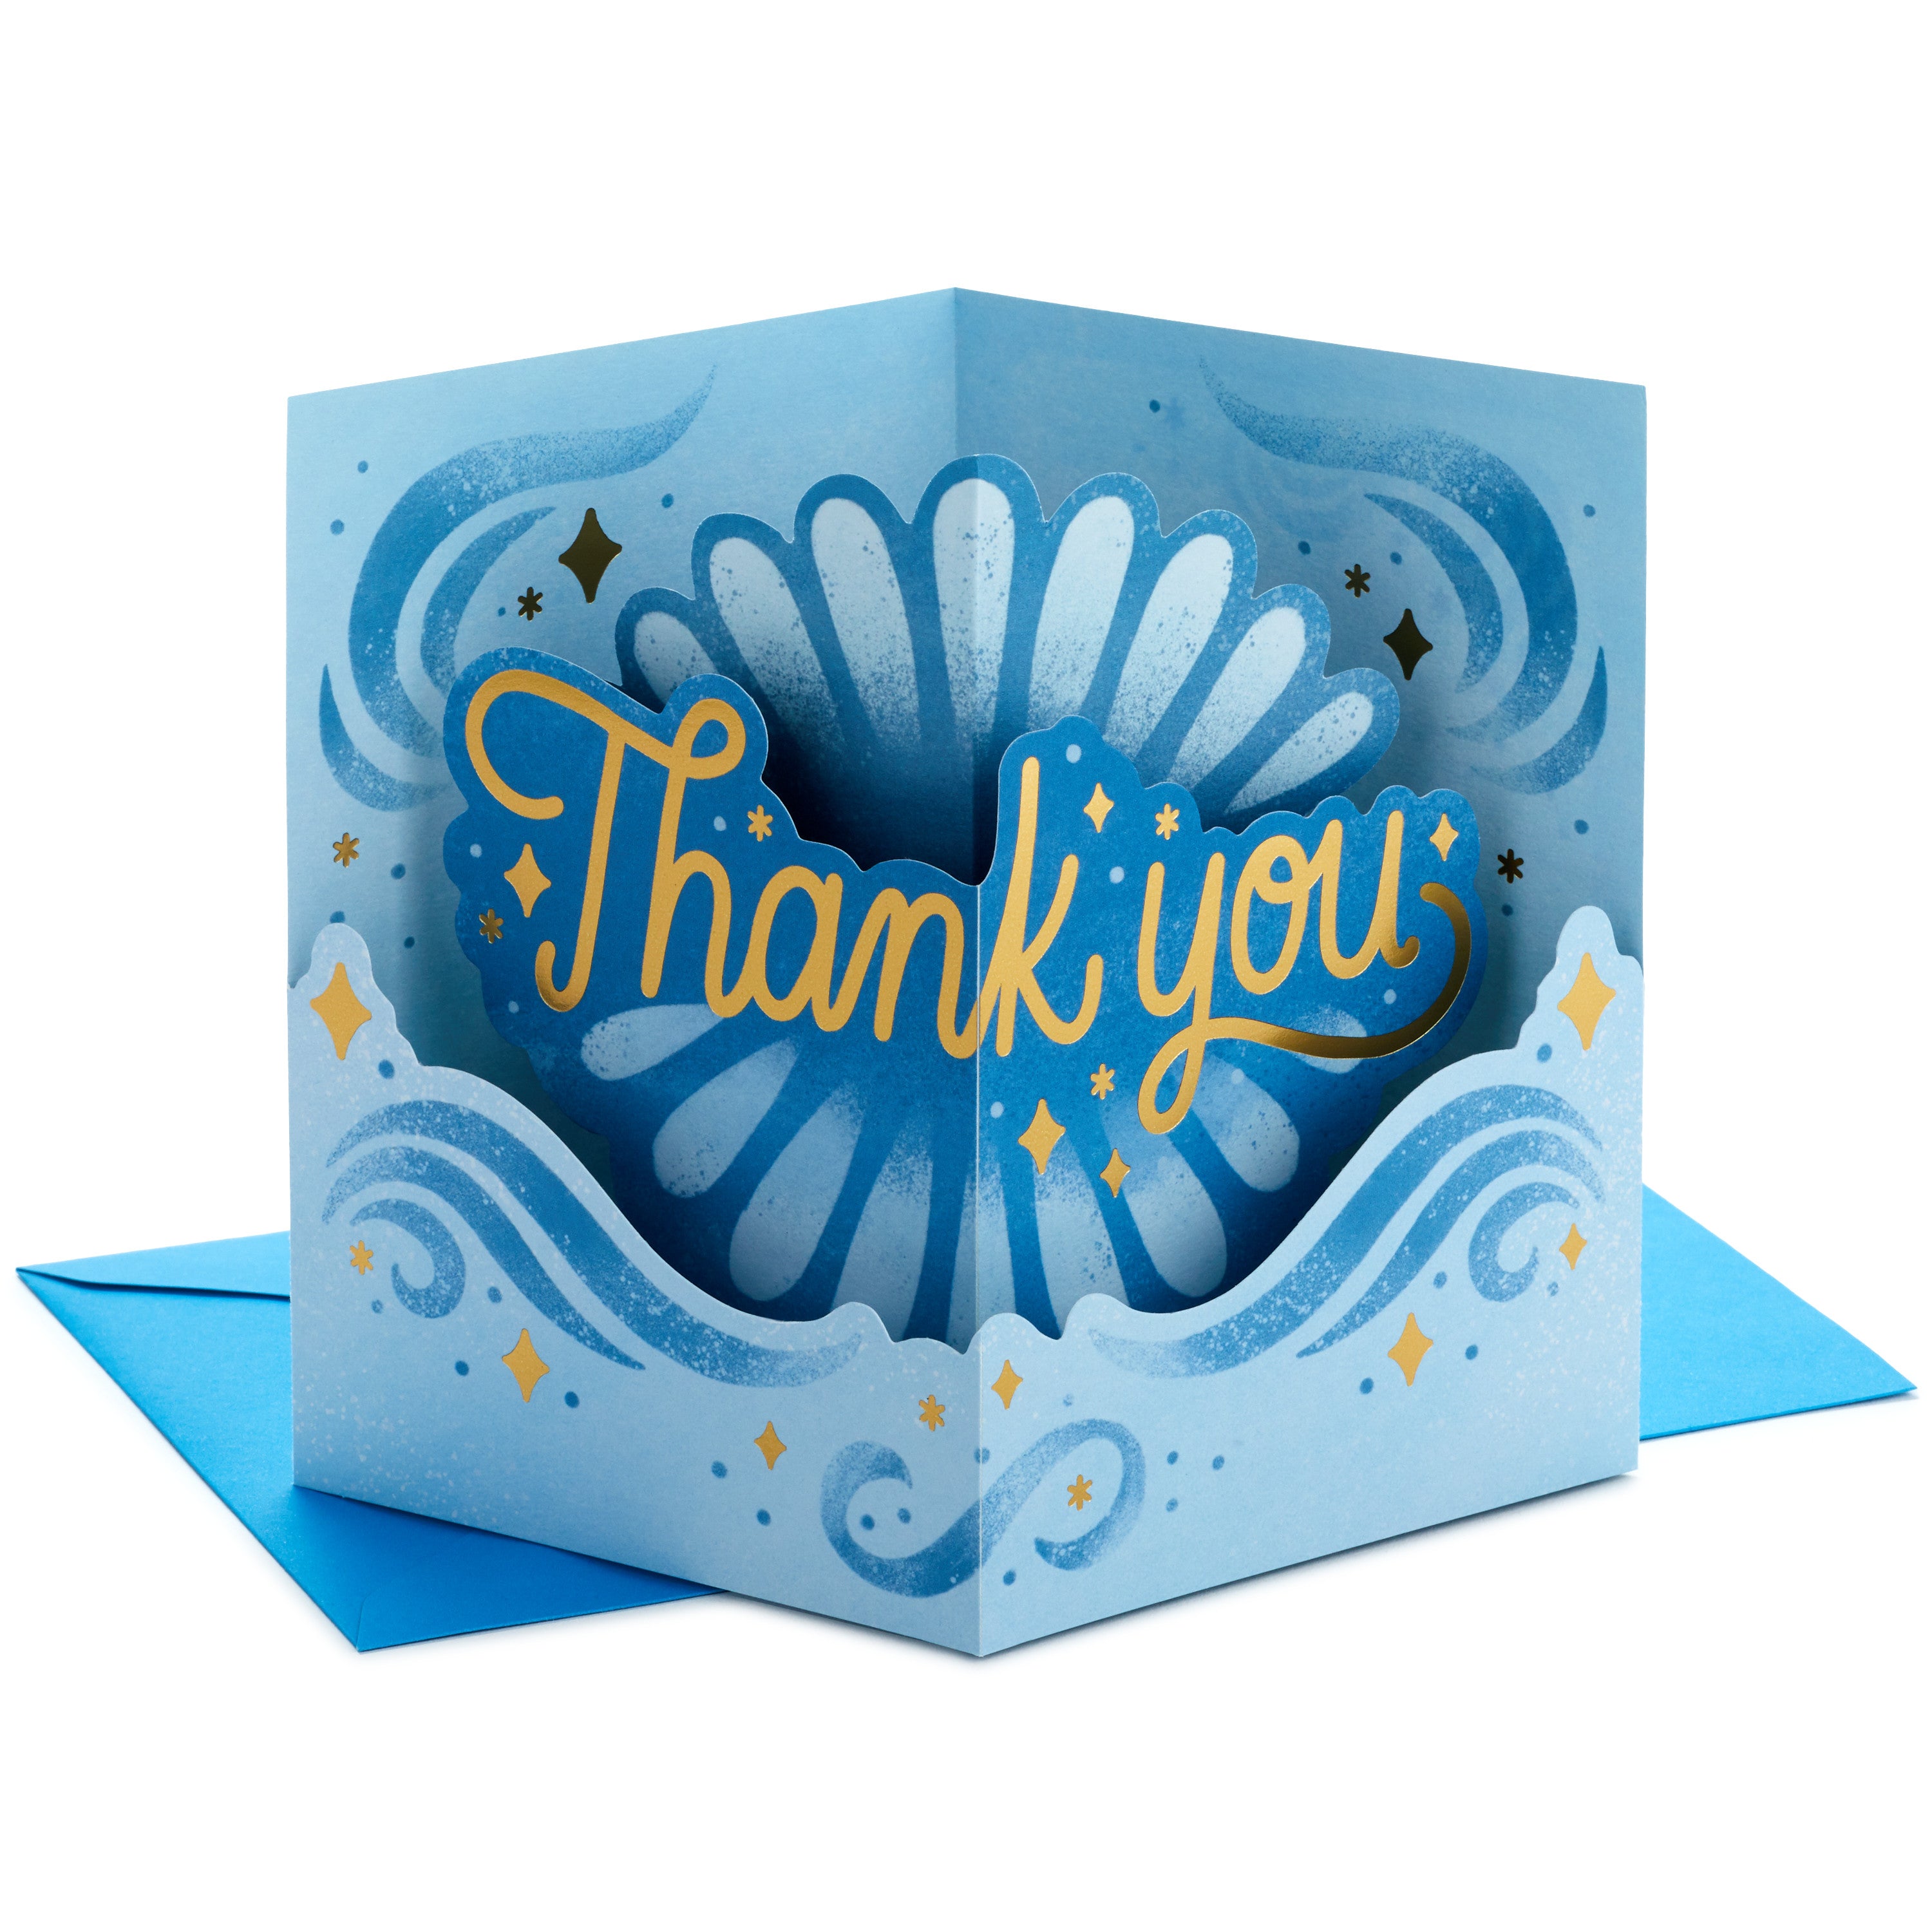 Hallmark Paper Wonder Pop Up Thank You Card, Nurses Day Card, Admin Professional Day Card (Blue and Gold)